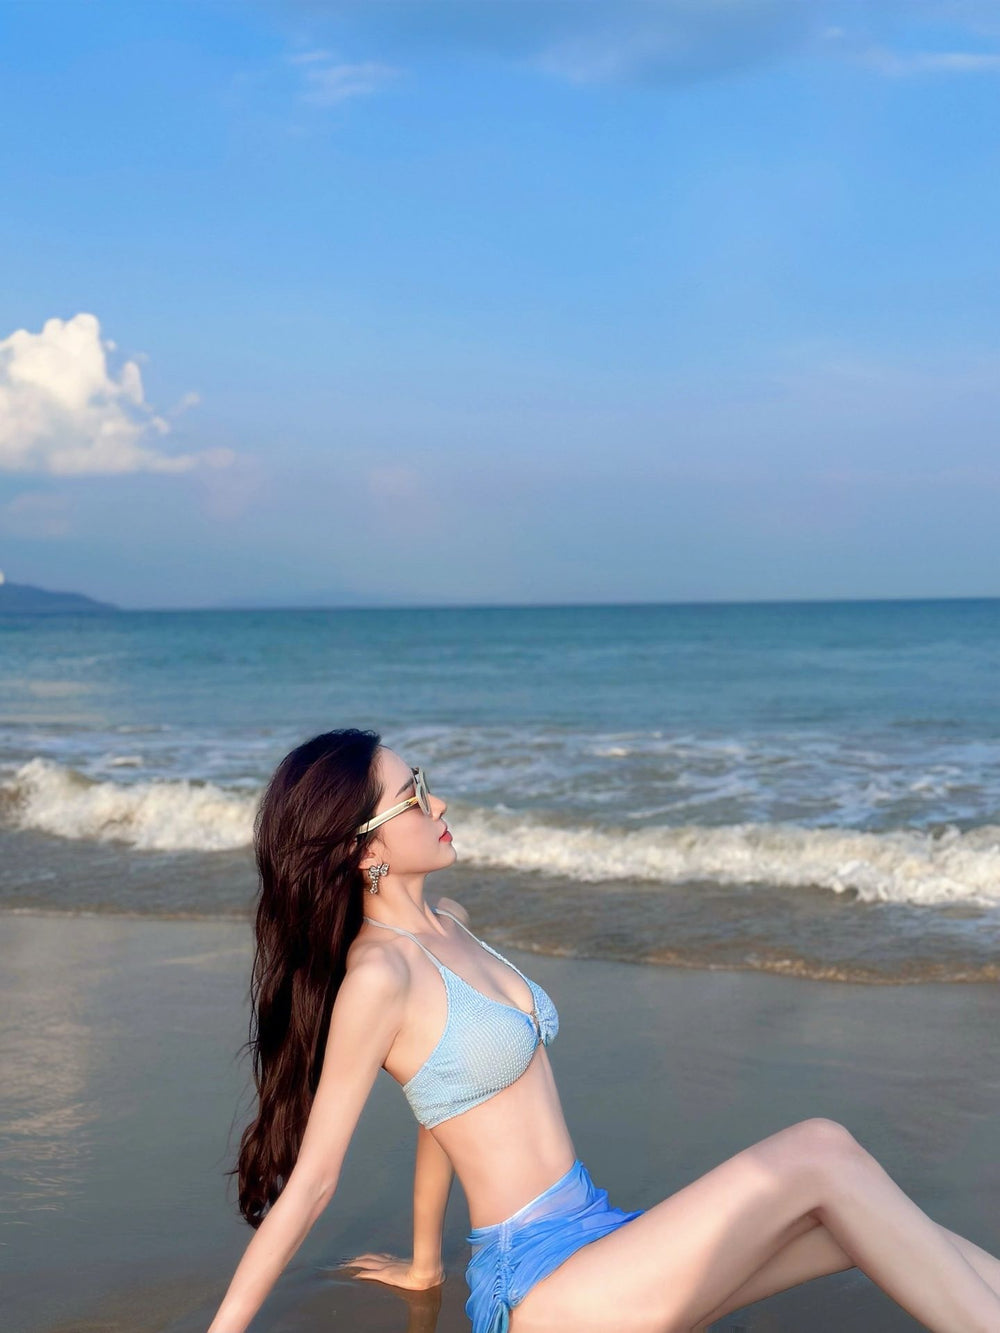 An enchanting sight of opulence and serenity: a beachside goddess adorned in a bikini, basking in the golden rays on a pristine shoreline with her Korean  fashionable sunglasses.